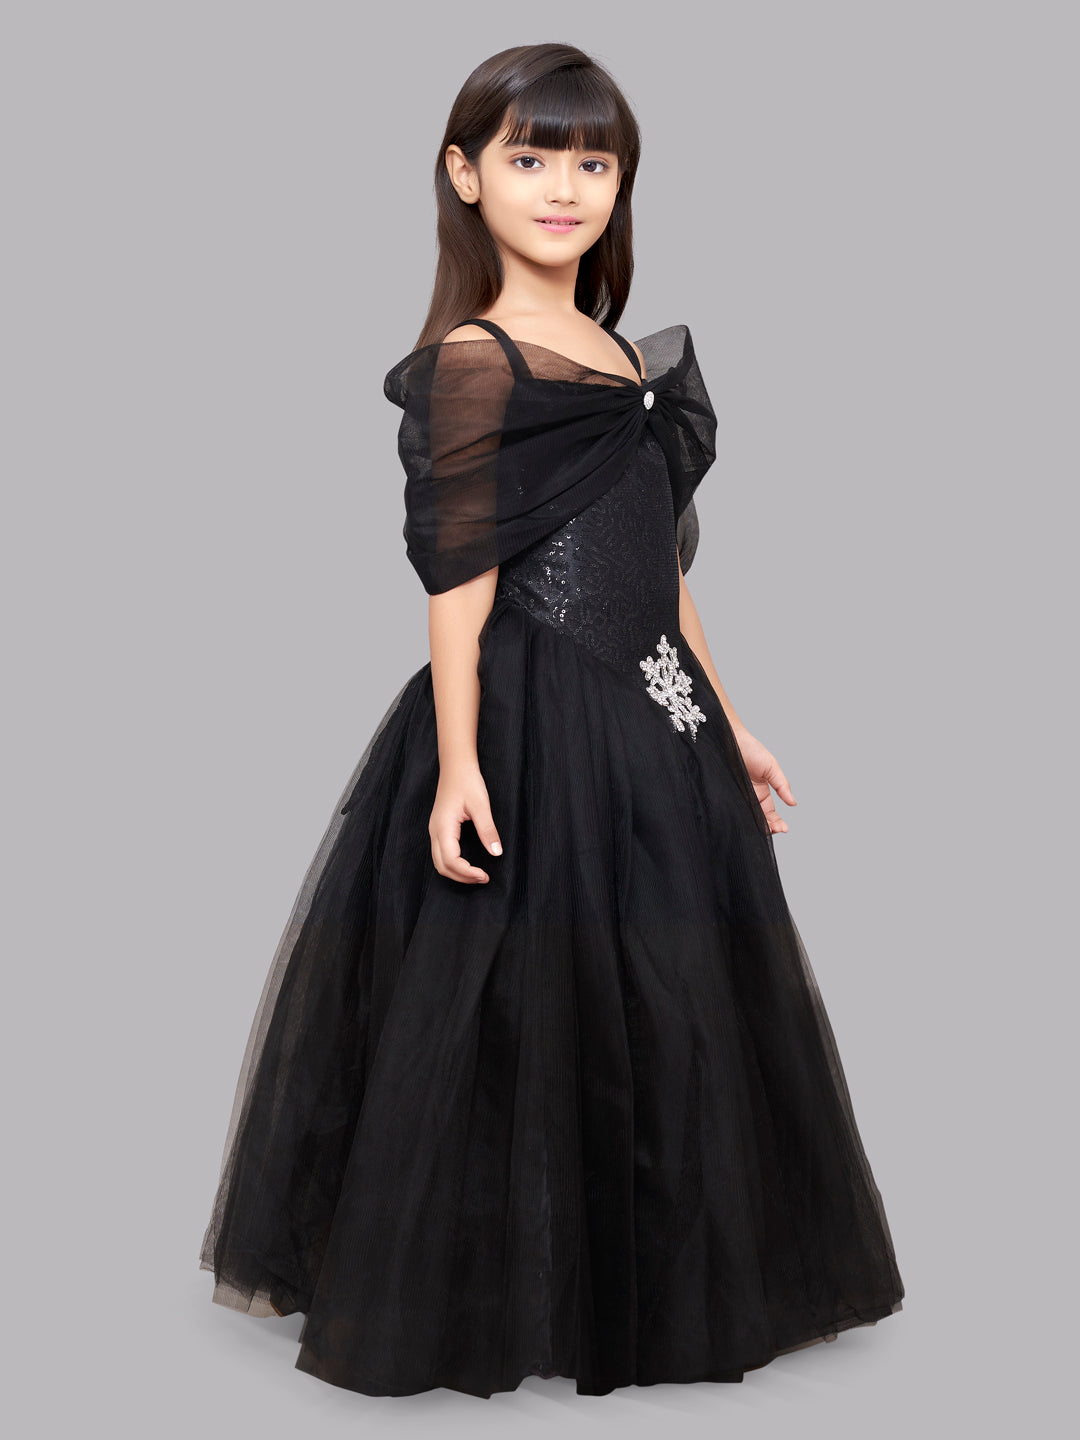 Beautiful Strapless Black Tulle Ball Gown Princess Prom Dresses Y0179 -  ShopperBoard